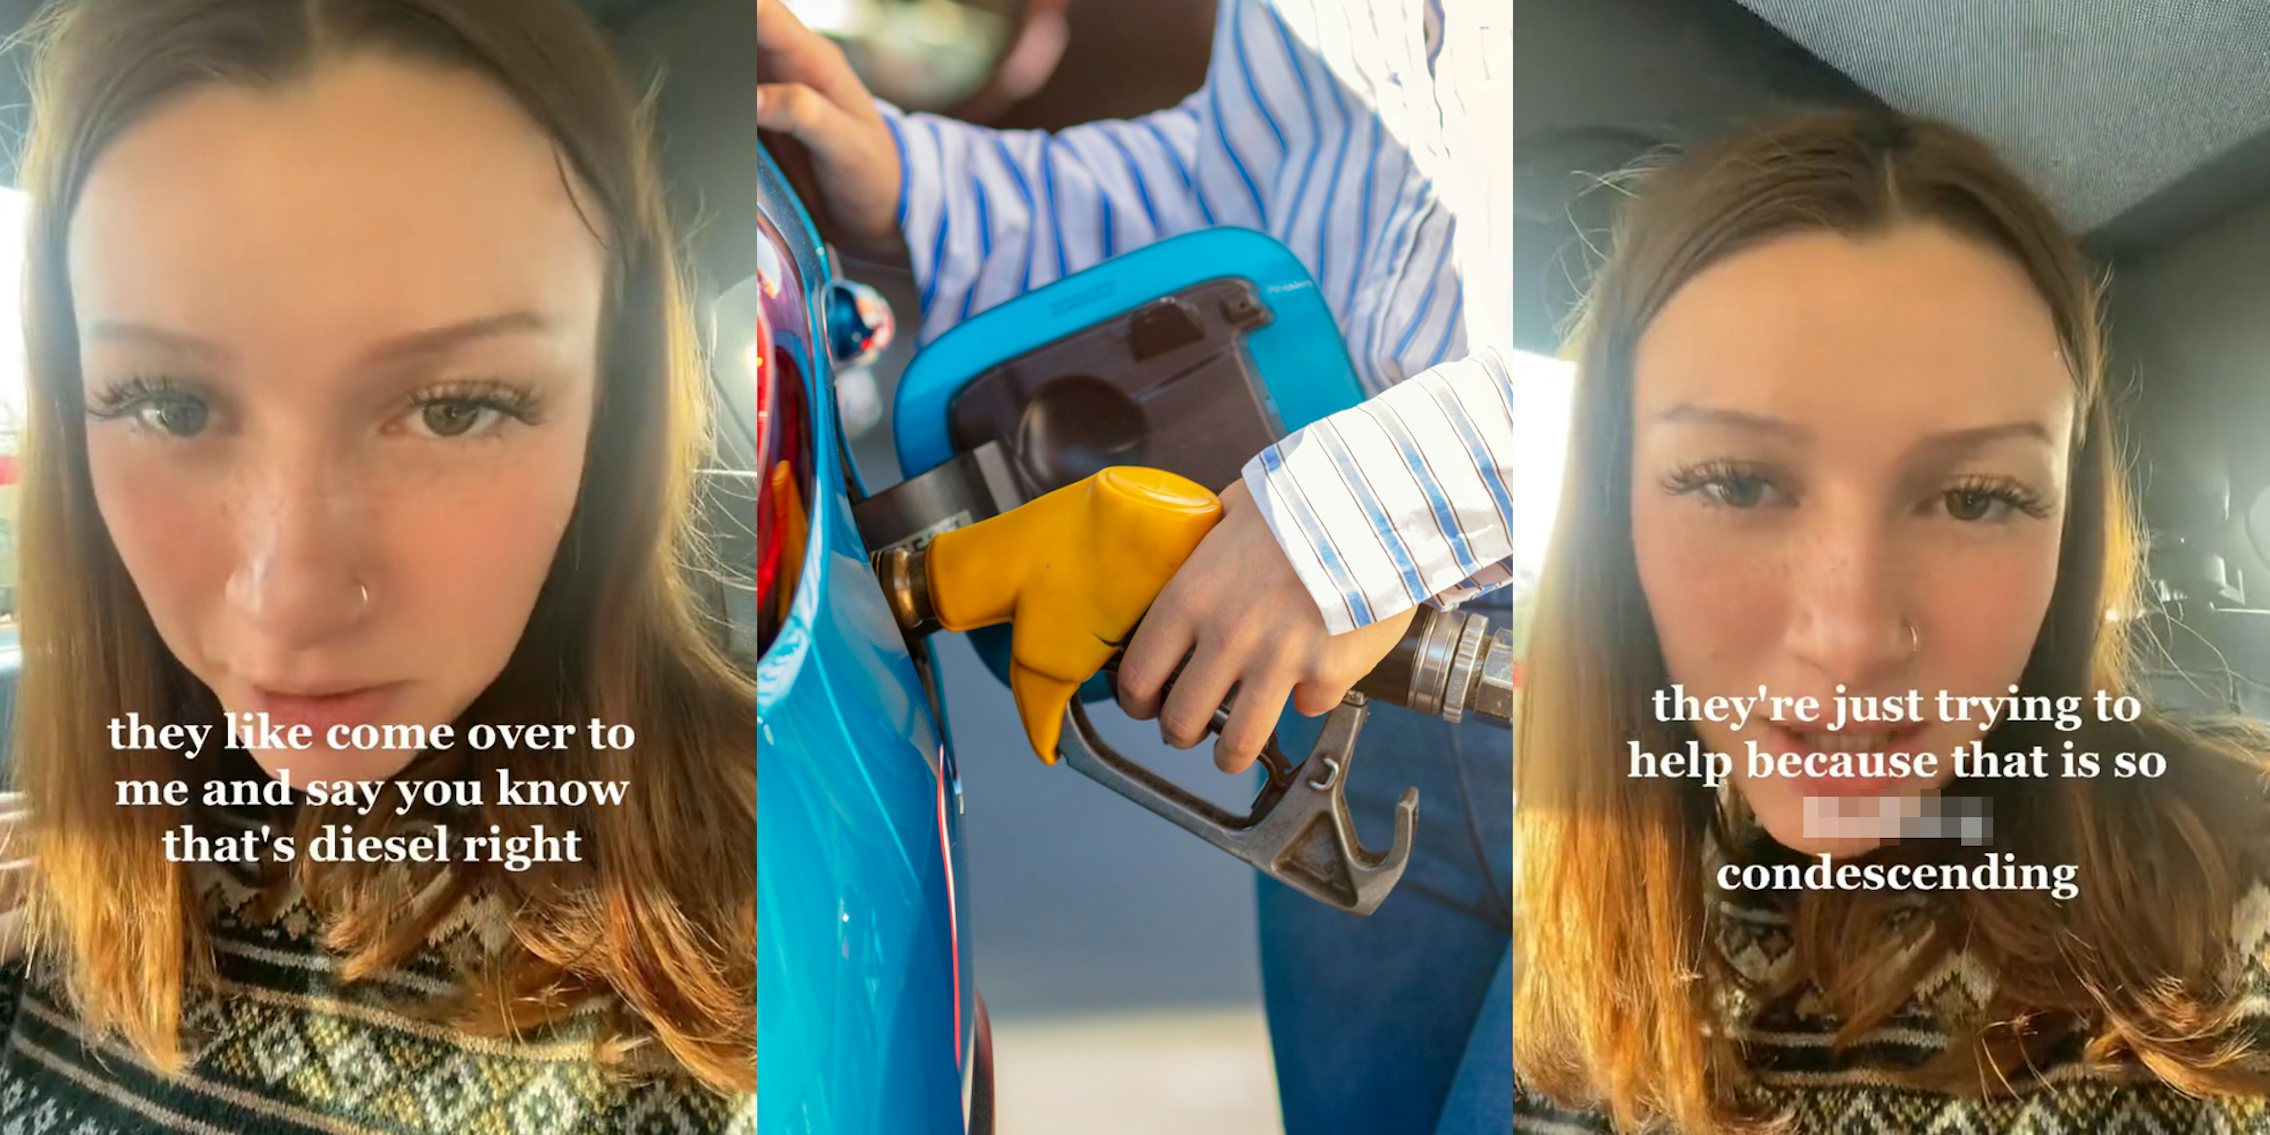 person speaking in car with caption 'they like come over to me and say you know that's diesel right' (l) person pumping gas into blue car (c) person speaking in car with caption 'they're just trying to help because that is so blank condescending' (r)